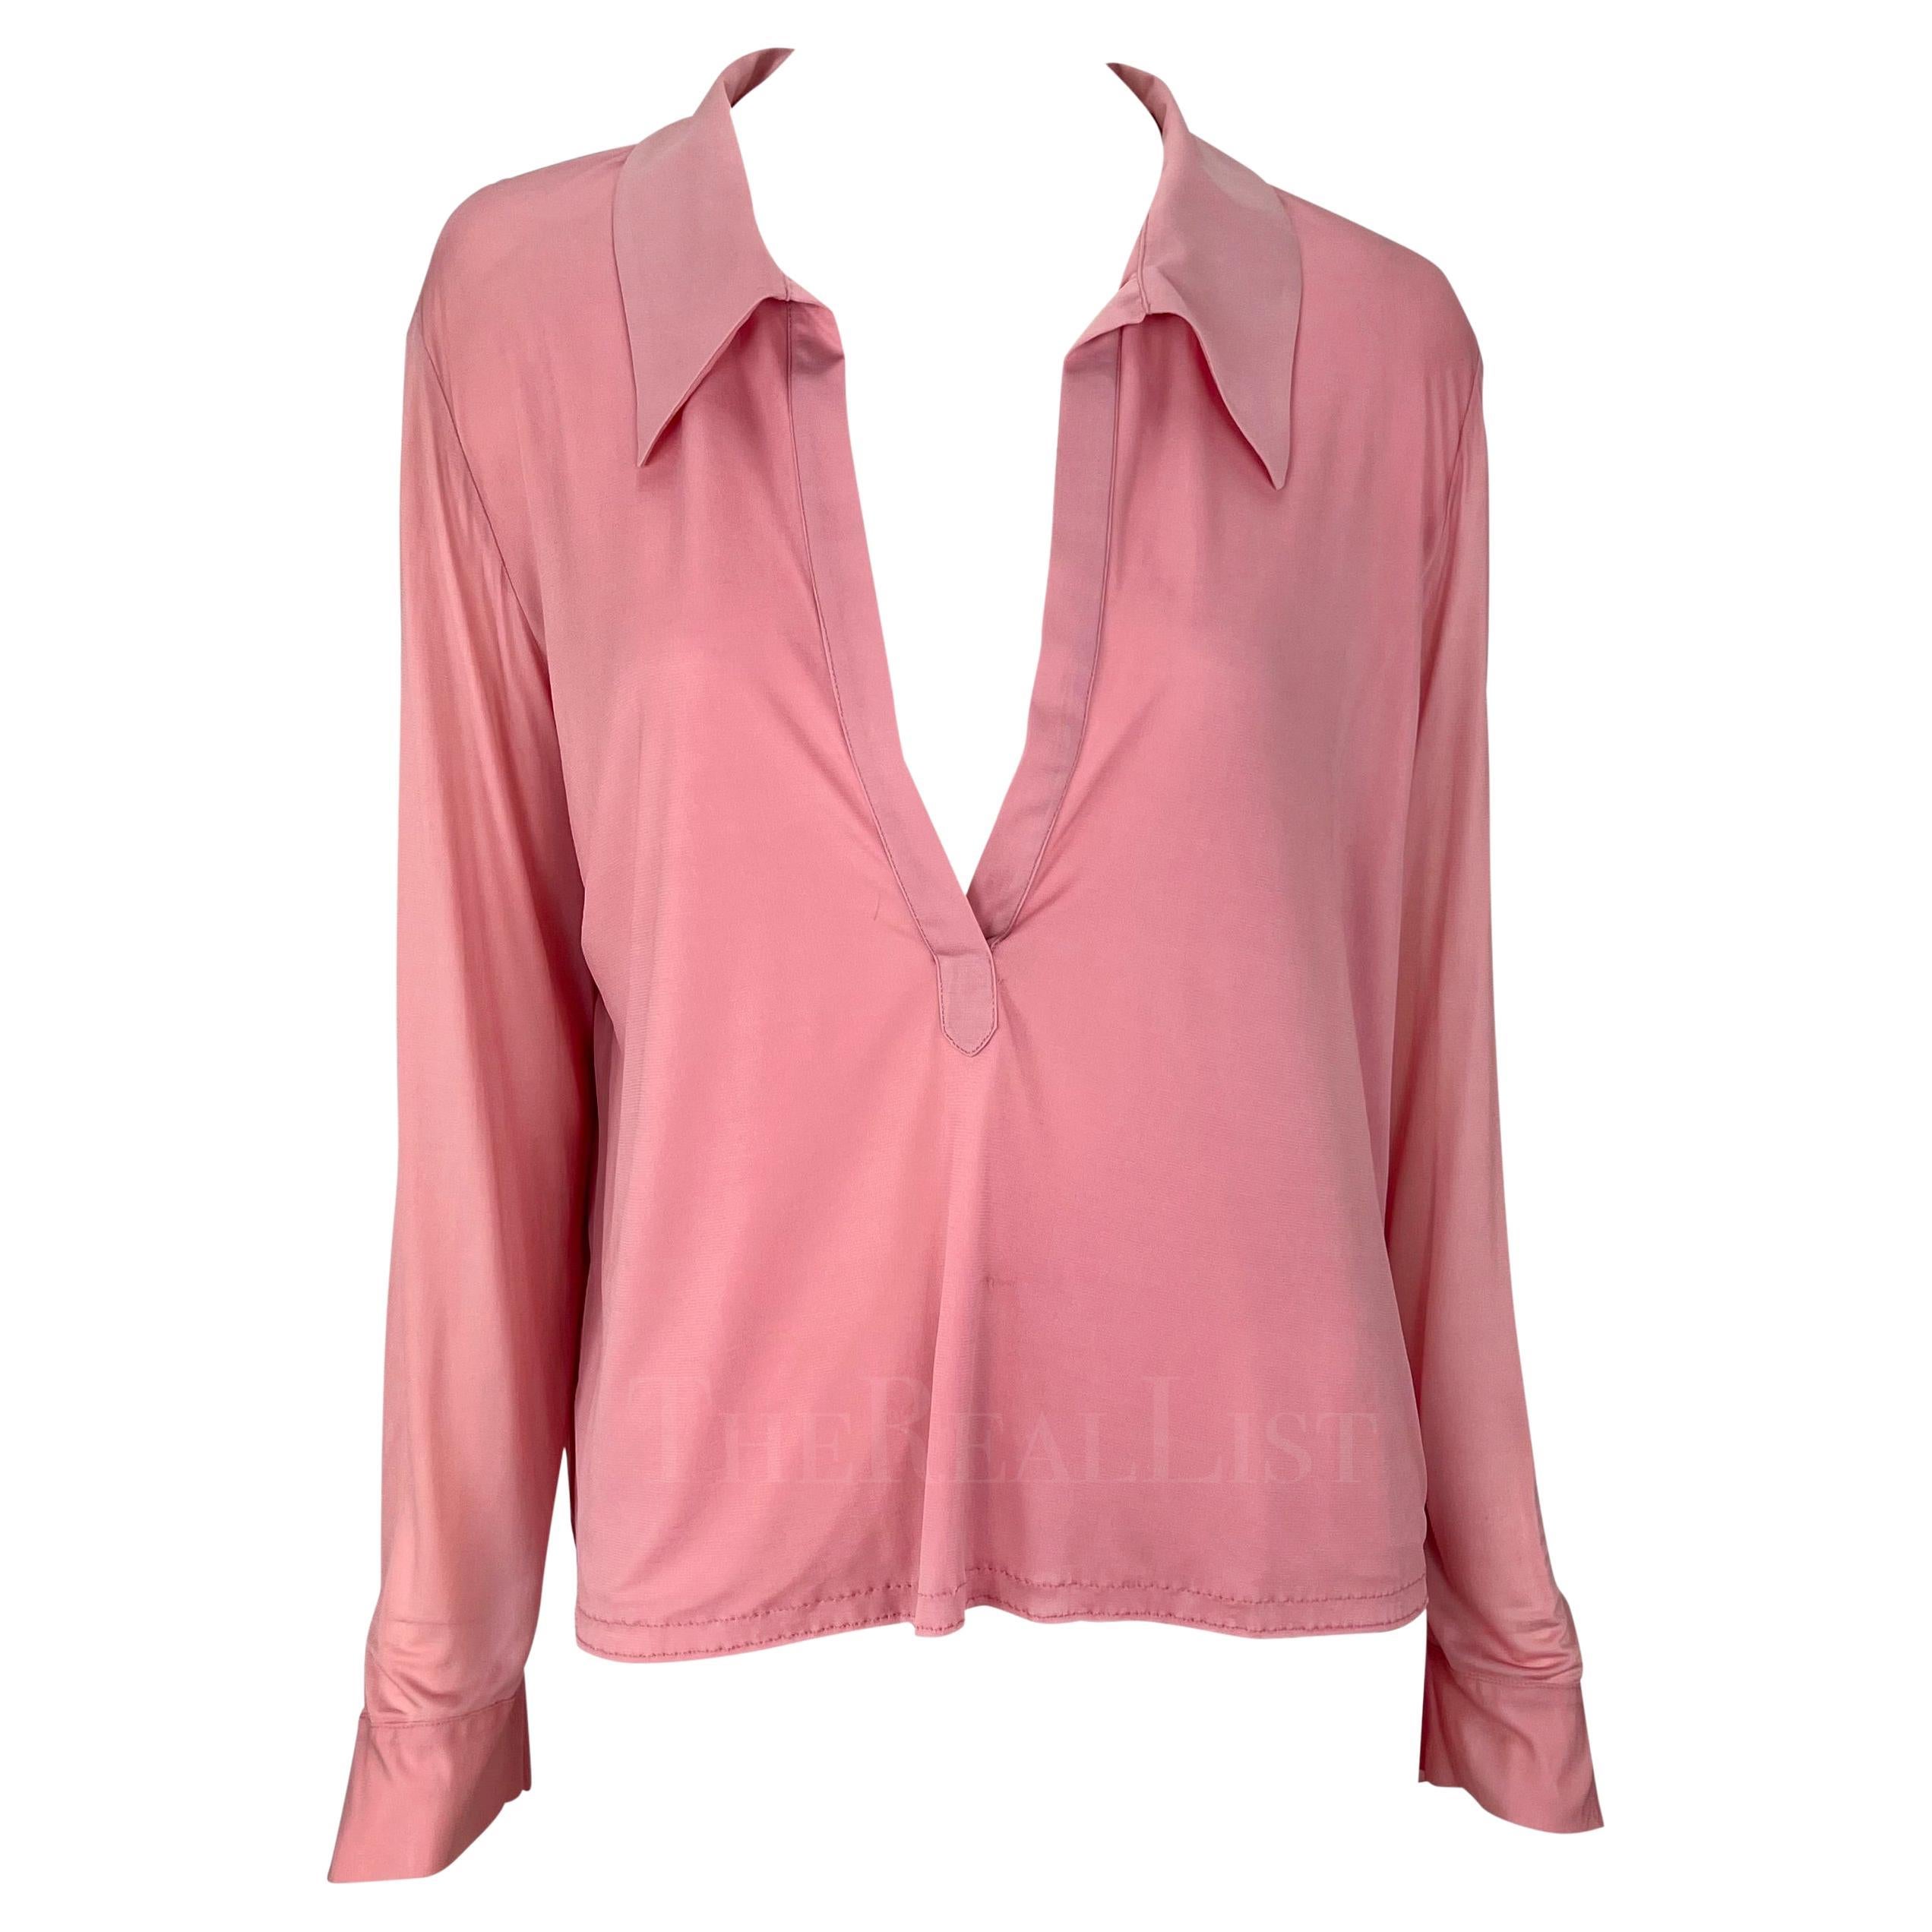 NWT S/S 2000 Gucci by Tom Ford Runway Ad Plunging Pink Collared Blouse Top For Sale